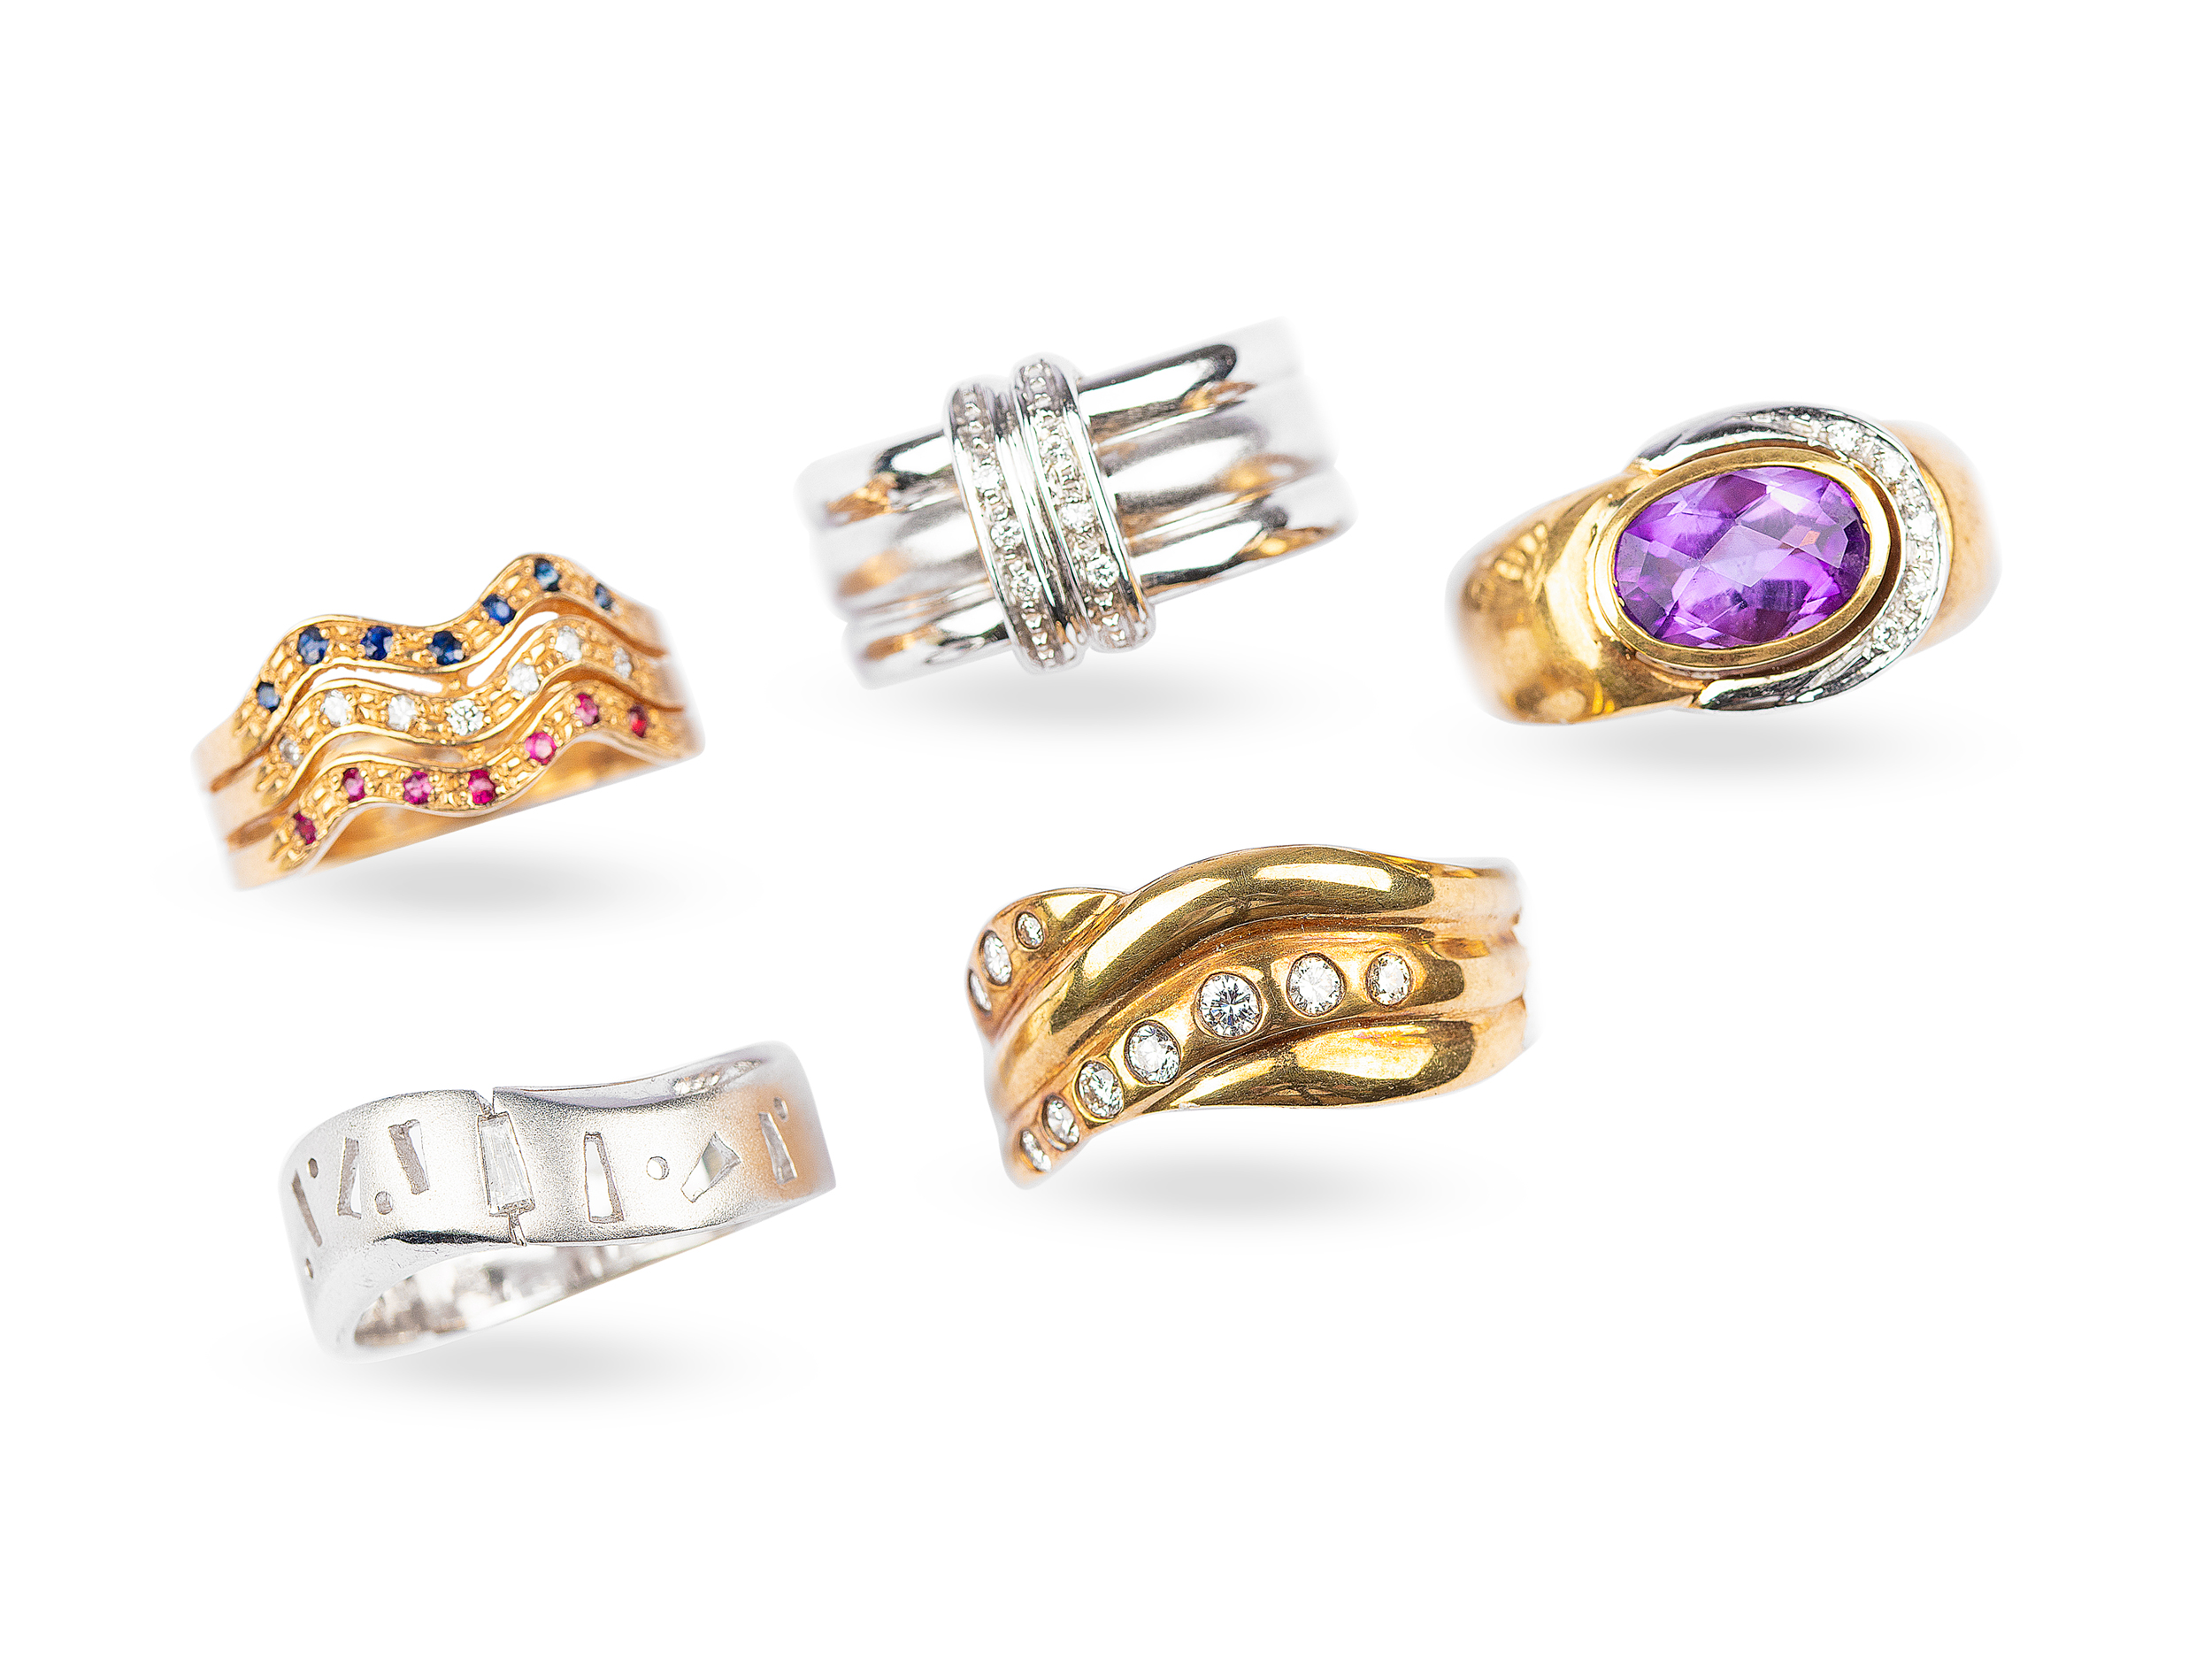 Mixed lot: 5 rings, 14kt yellow gold or white gold, With diamonds, moissants & white stones